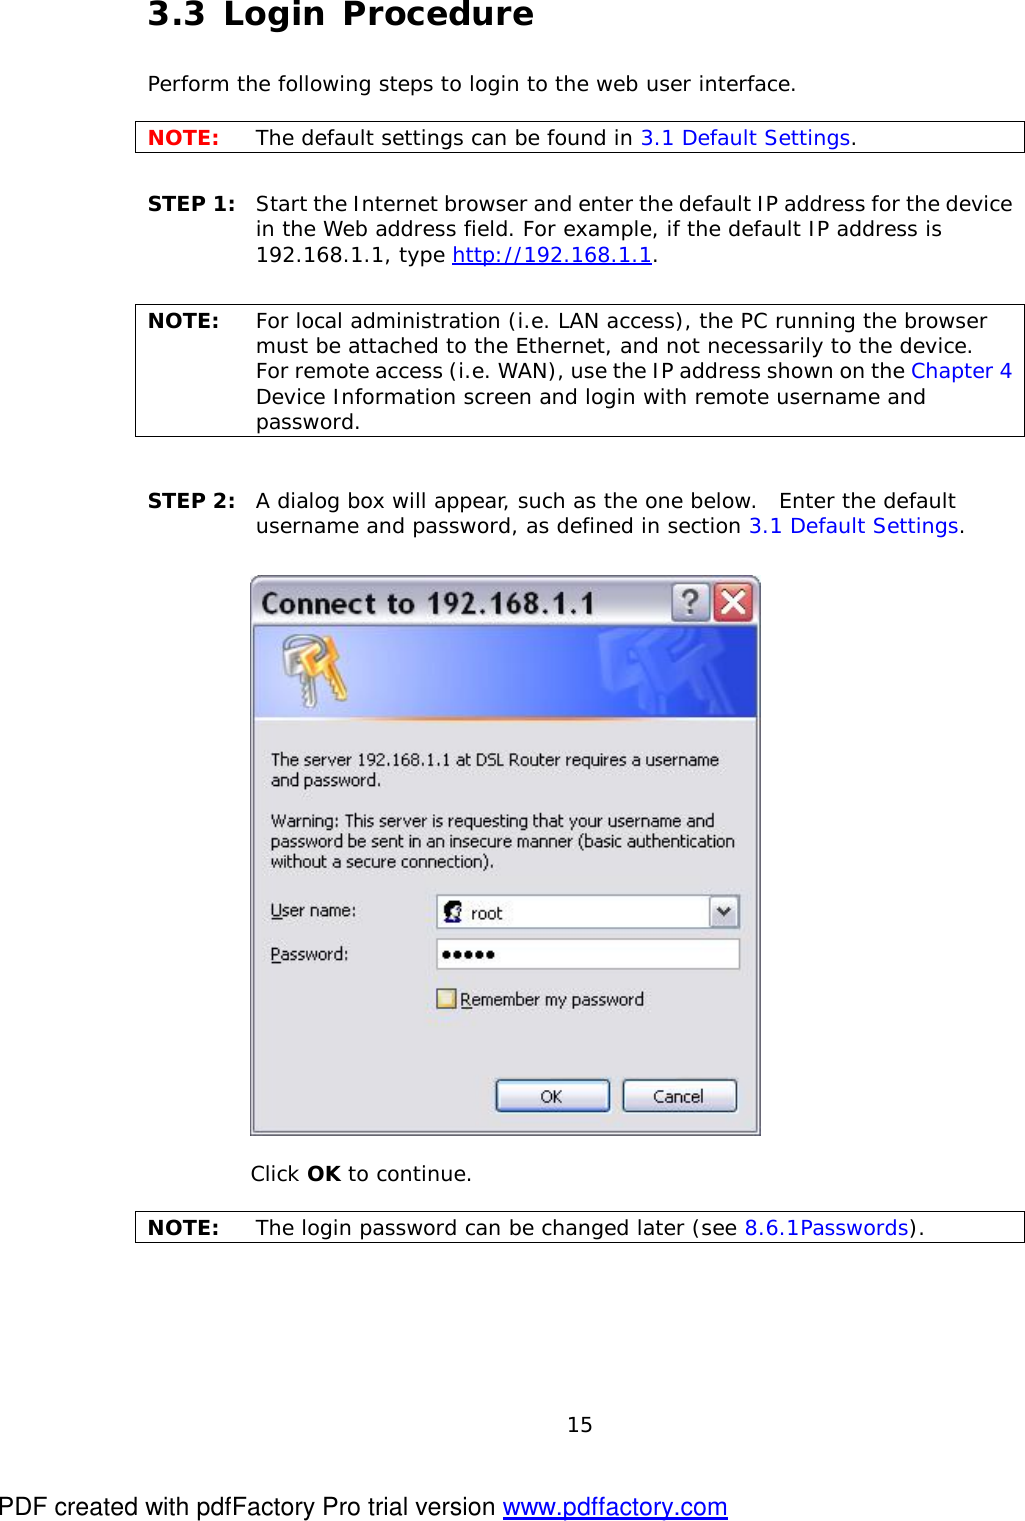  15 3.3 Login Procedure Perform the following steps to login to the web user interface.    NOTE:  The default settings can be found in 3.1 Default Settings.     STEP 1:  Start the Internet browser and enter the default IP address for the device in the Web address field. For example, if the default IP address is 192.168.1.1, type http://192.168.1.1.  NOTE:  For local administration (i.e. LAN access), the PC running the browser must be attached to the Ethernet, and not necessarily to the device.   For remote access (i.e. WAN), use the IP address shown on the Chapter 4 Device Information screen and login with remote username and password.  STEP 2:  A dialog box will appear, such as the one below.  Enter the default username and password, as defined in section 3.1 Default Settings.       Click OK to continue.  NOTE:  The login password can be changed later (see 8.6.1 Passwords). PDF created with pdfFactory Pro trial version www.pdffactory.com